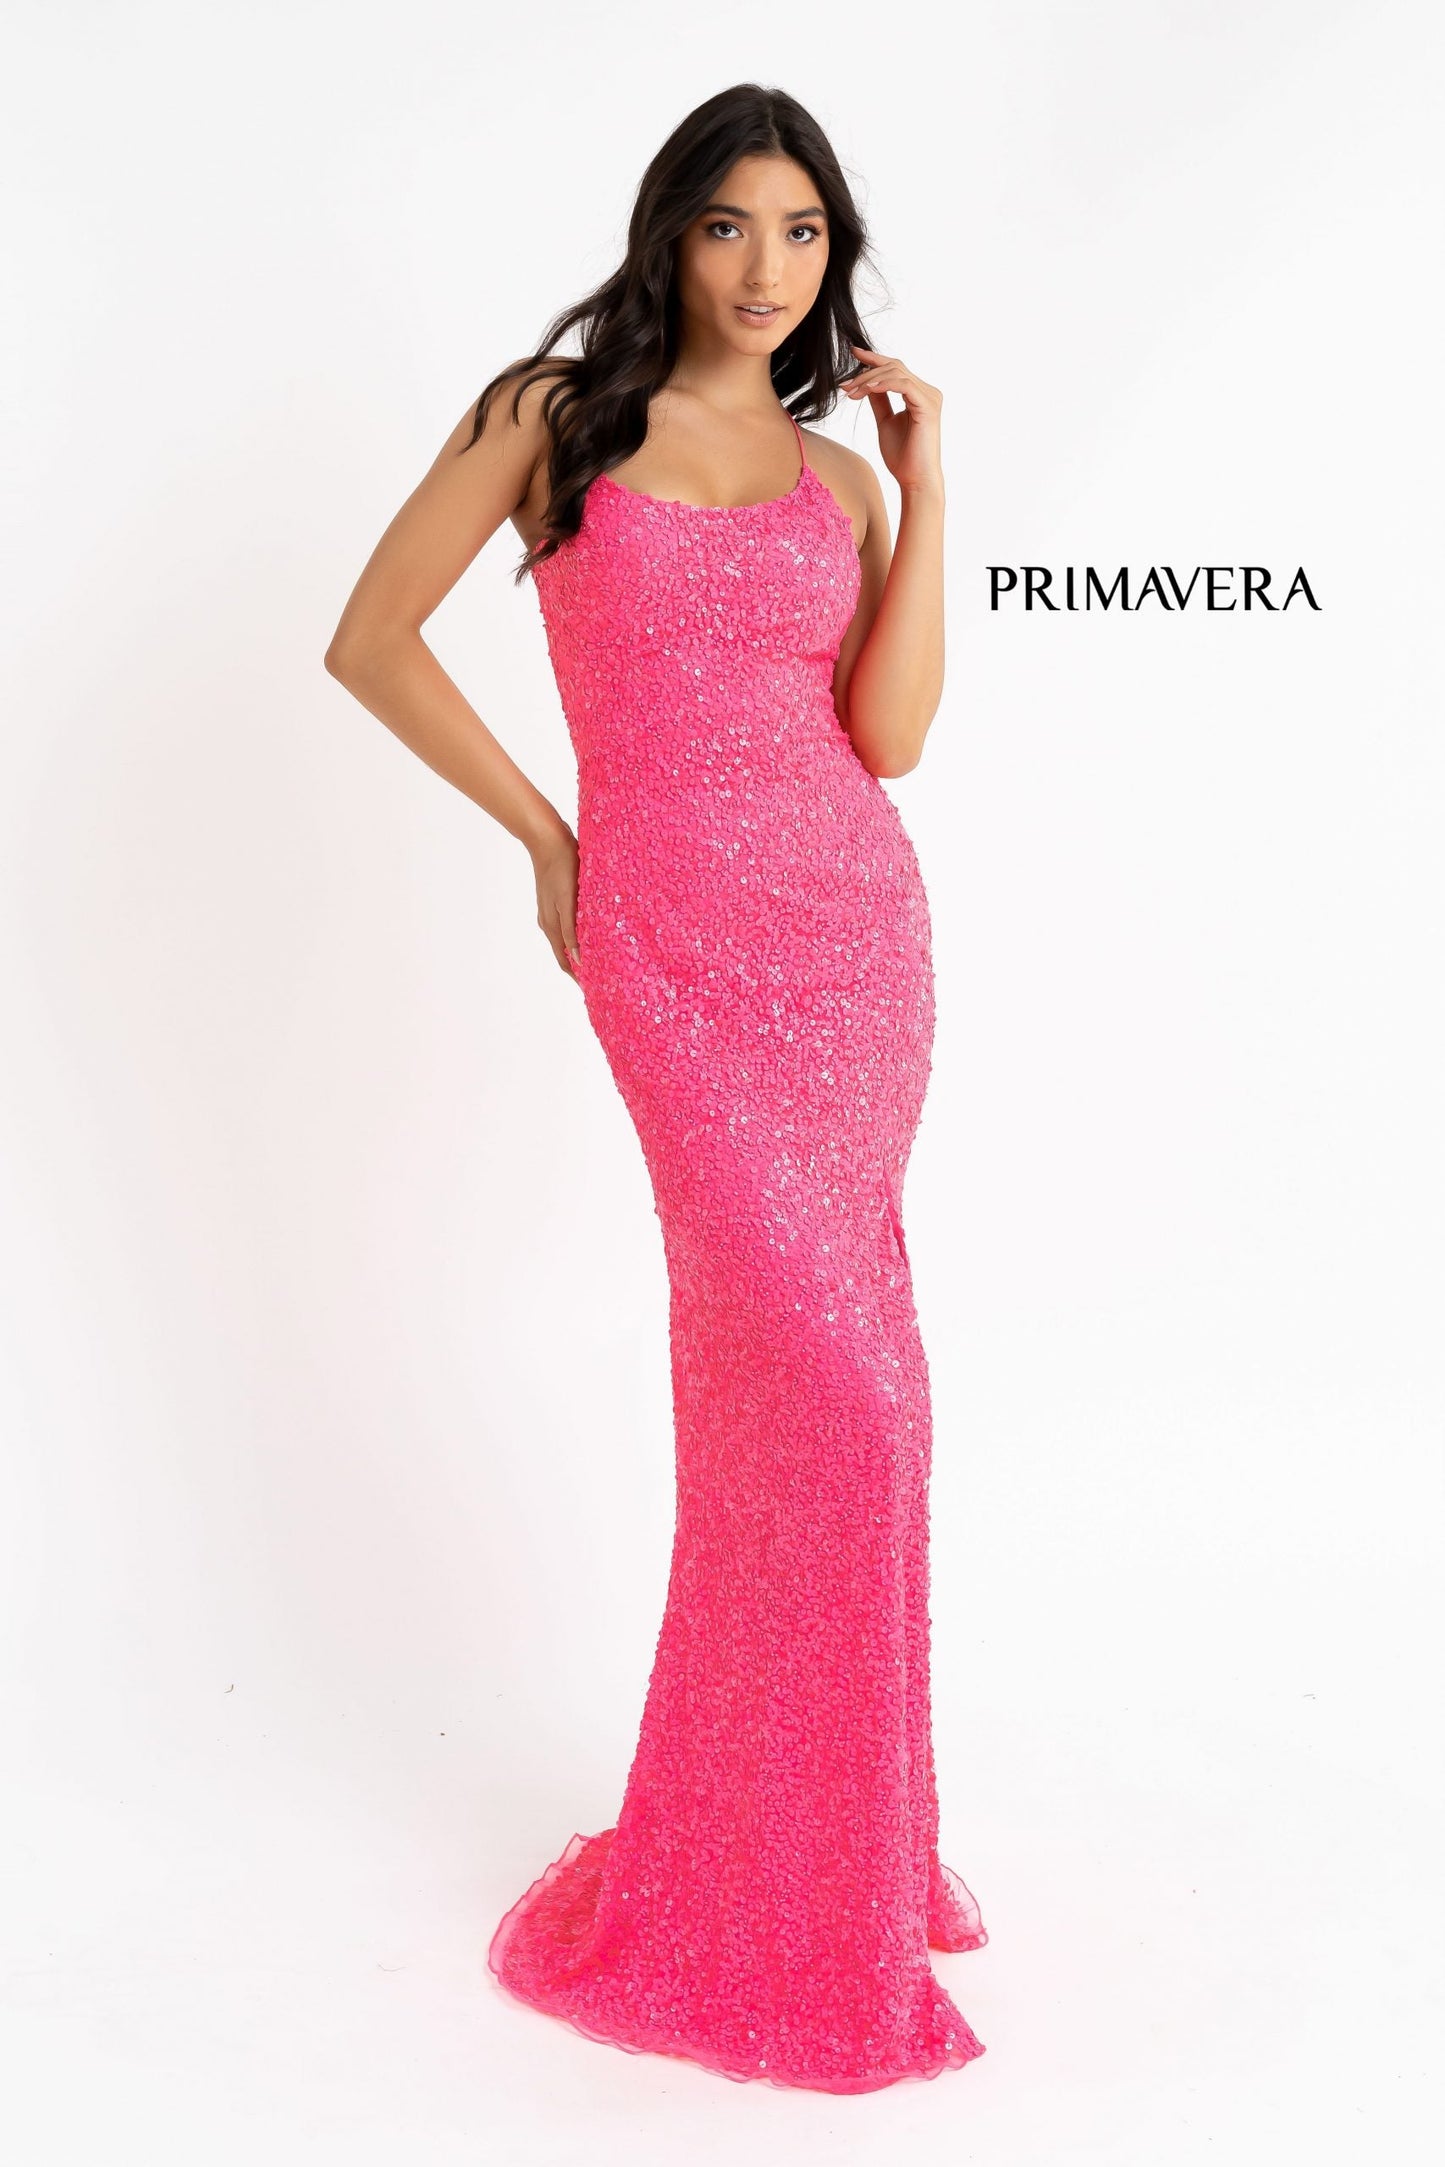 Primavera Couture 3290 Size 14 Neon Sage Prom Dress Sequins Long Fitted Tie Back Scoop Neckline